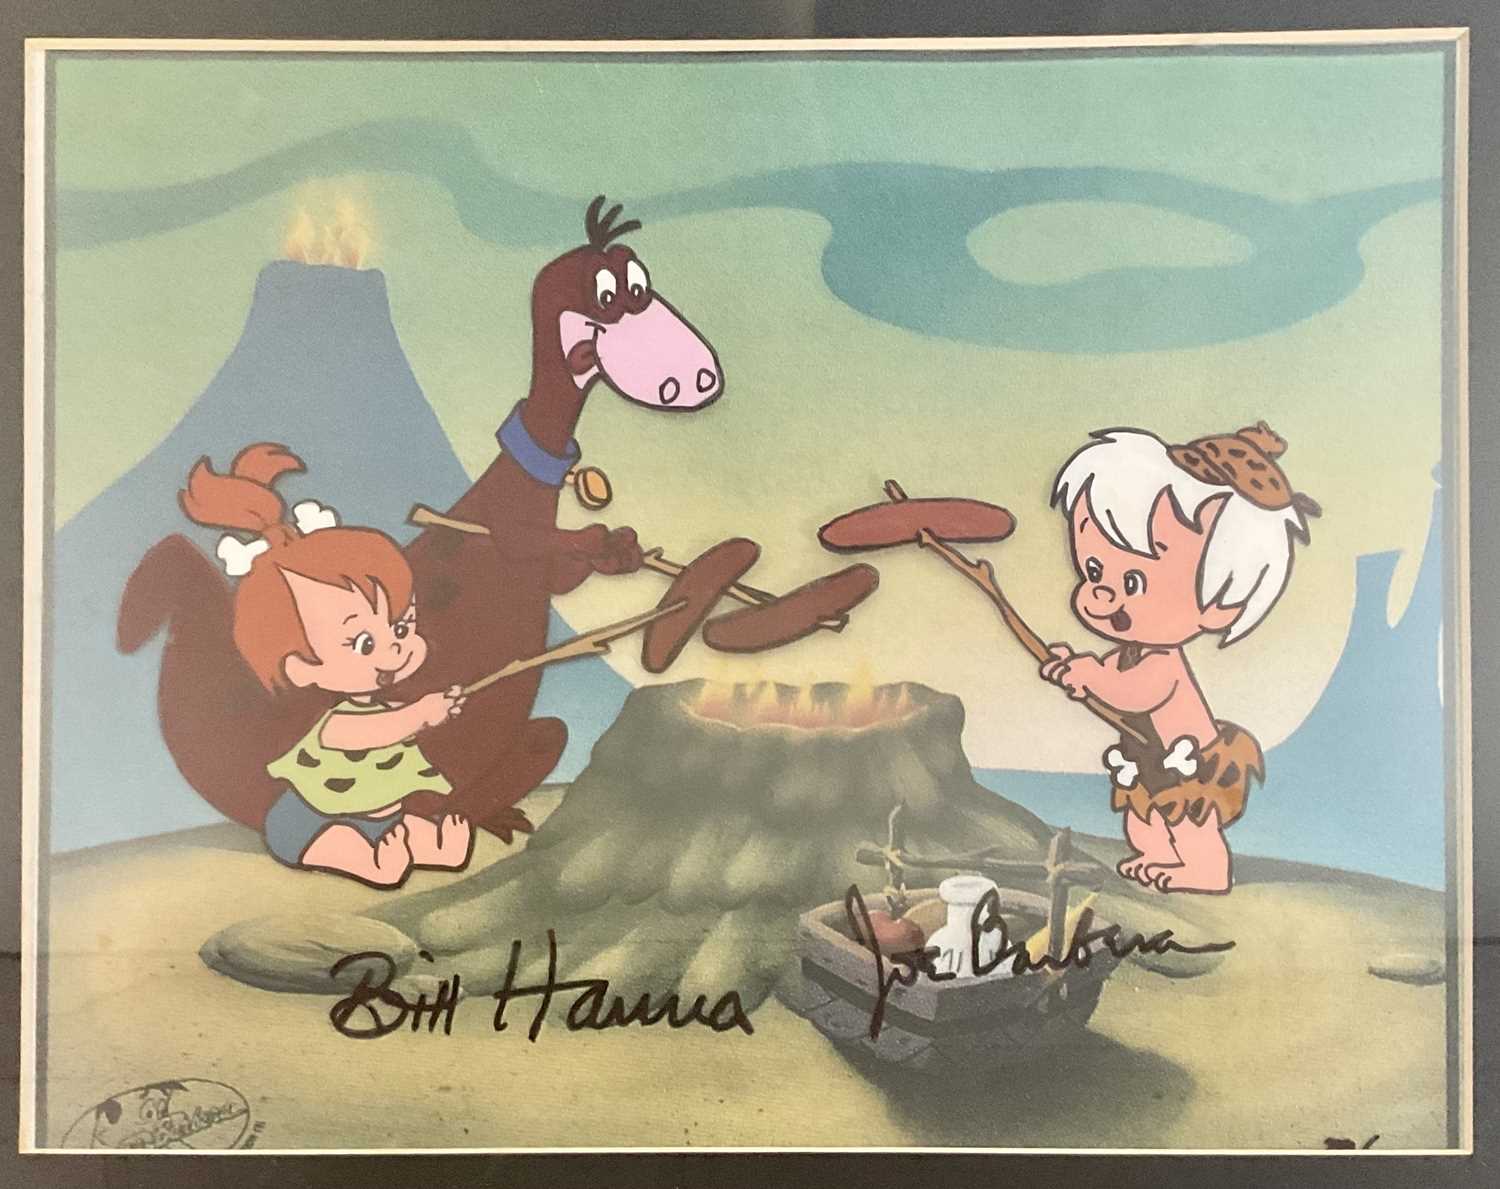 A hand painted animation cel signed by Flintstones creators Bill Hanna and Joseph Barbera. This